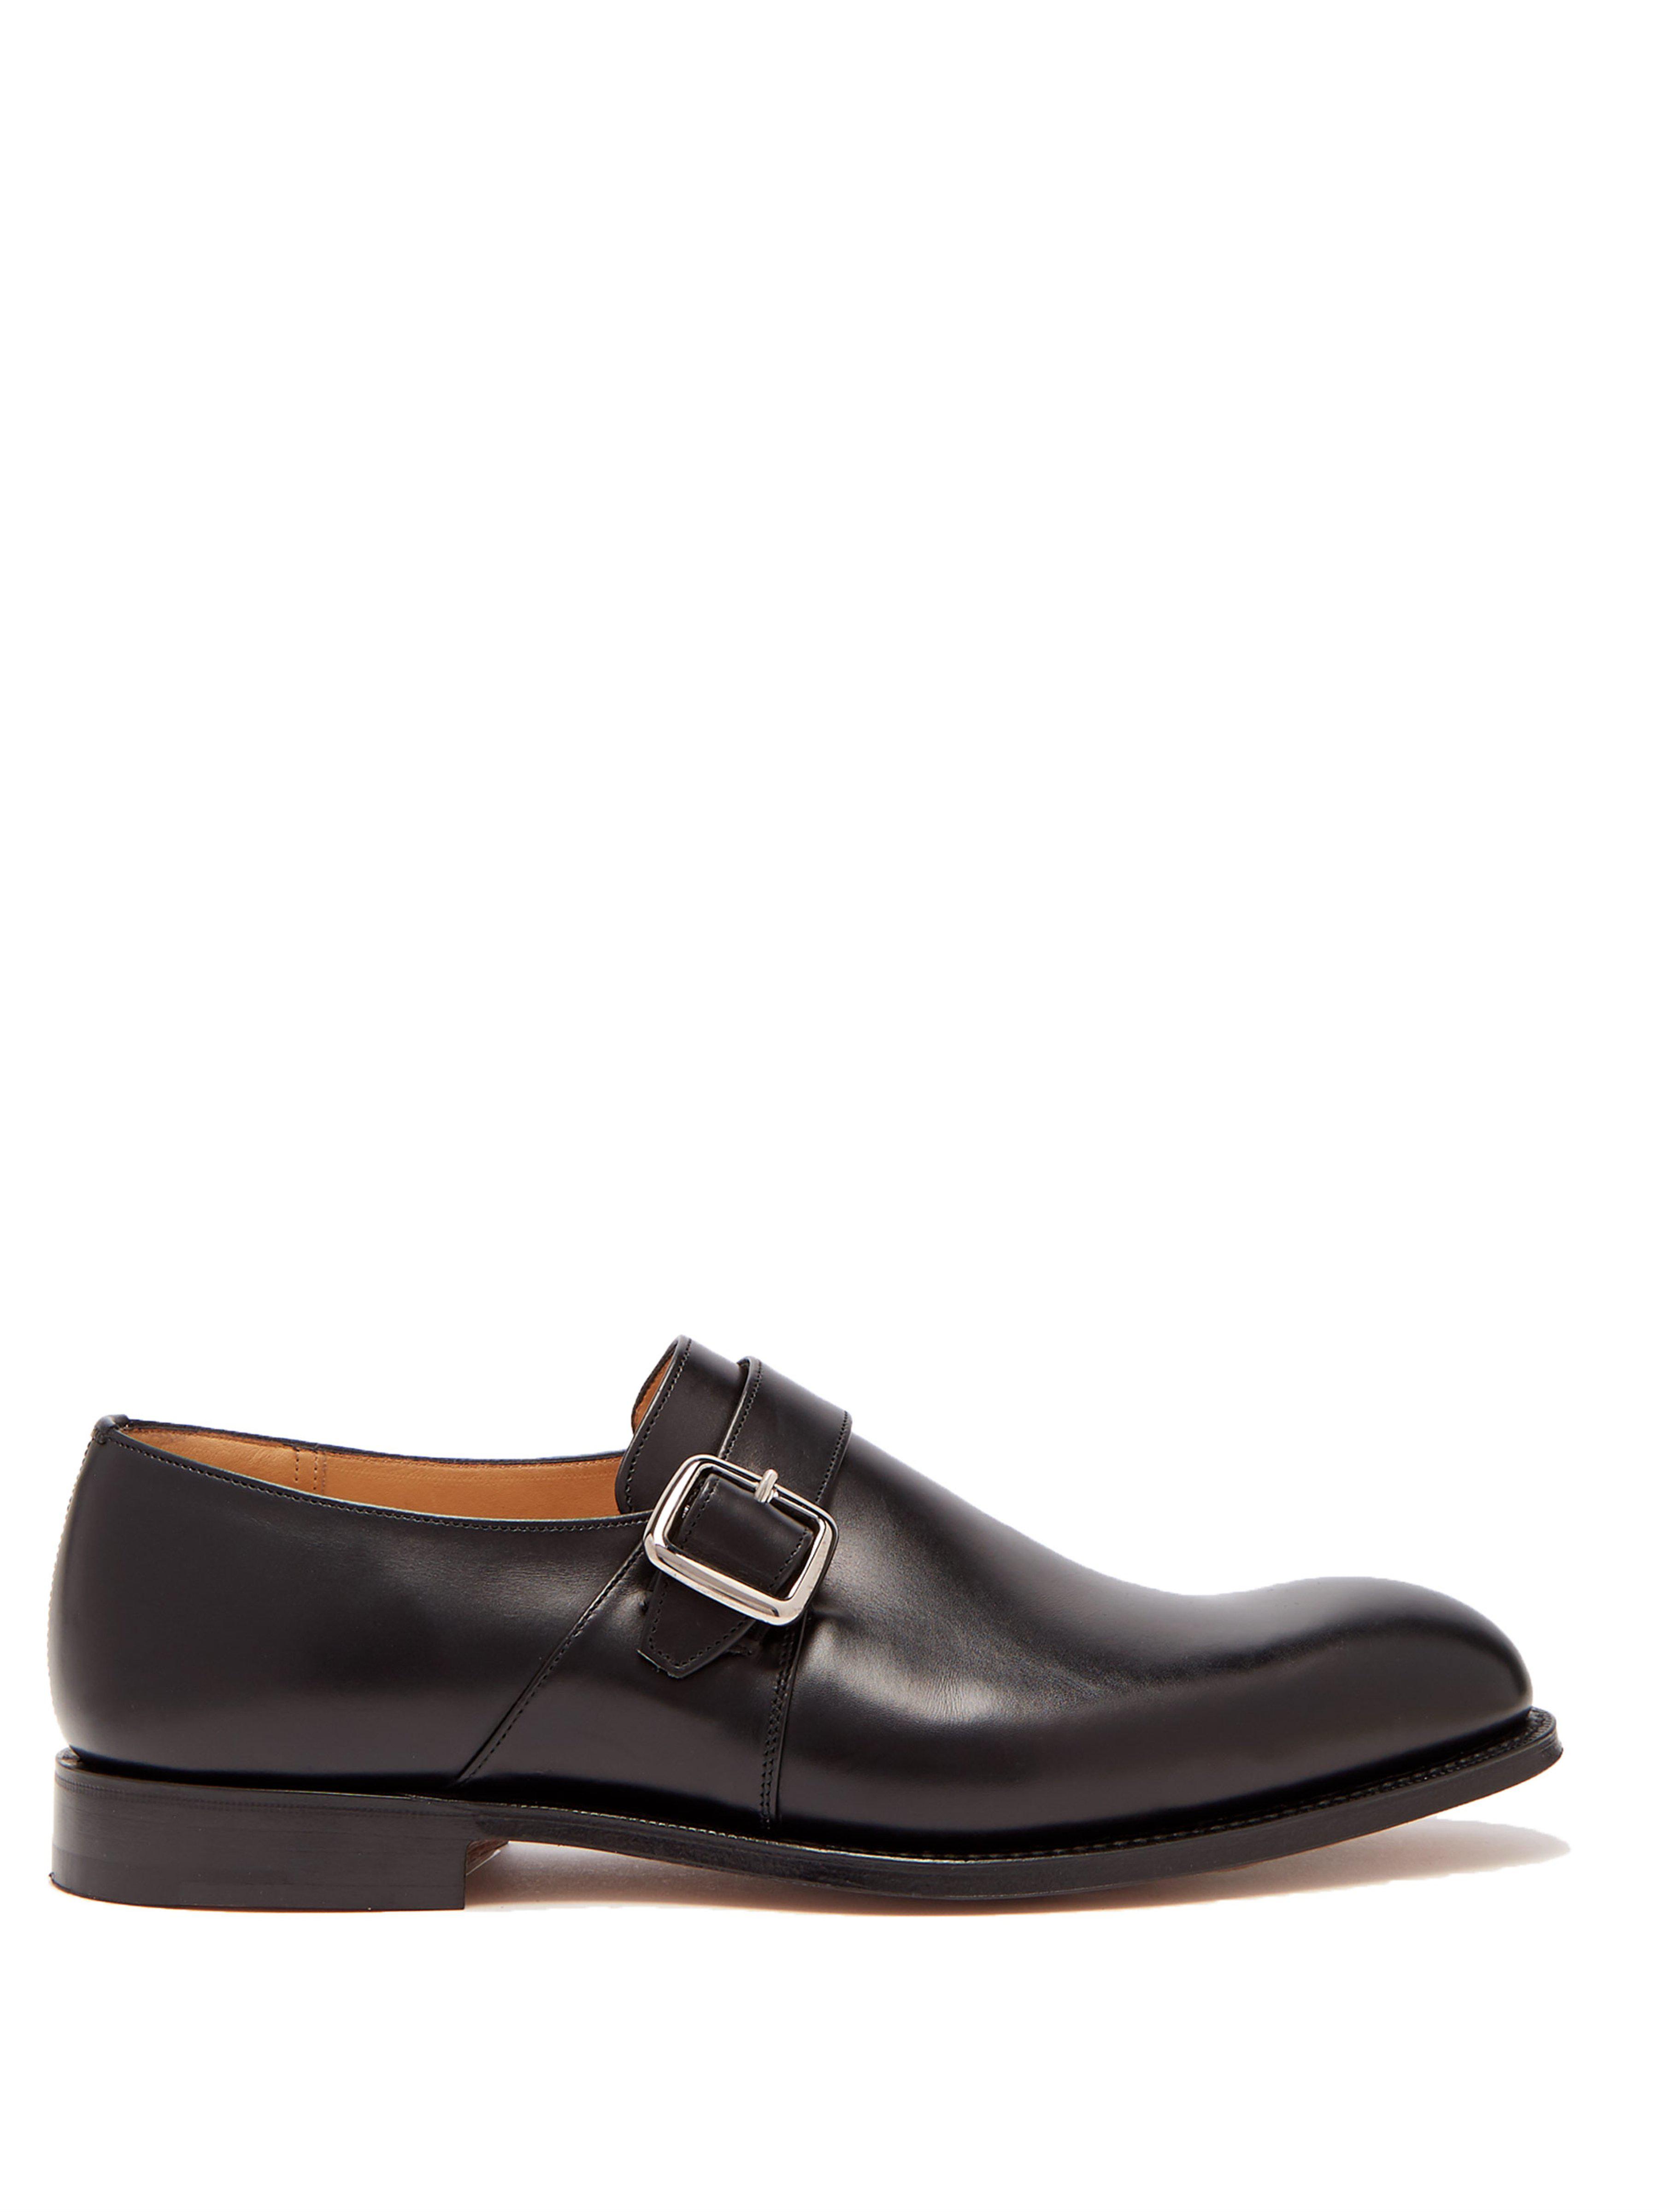 Church's Westbury Monk Strap Leather Shoes in Black for Men - Lyst